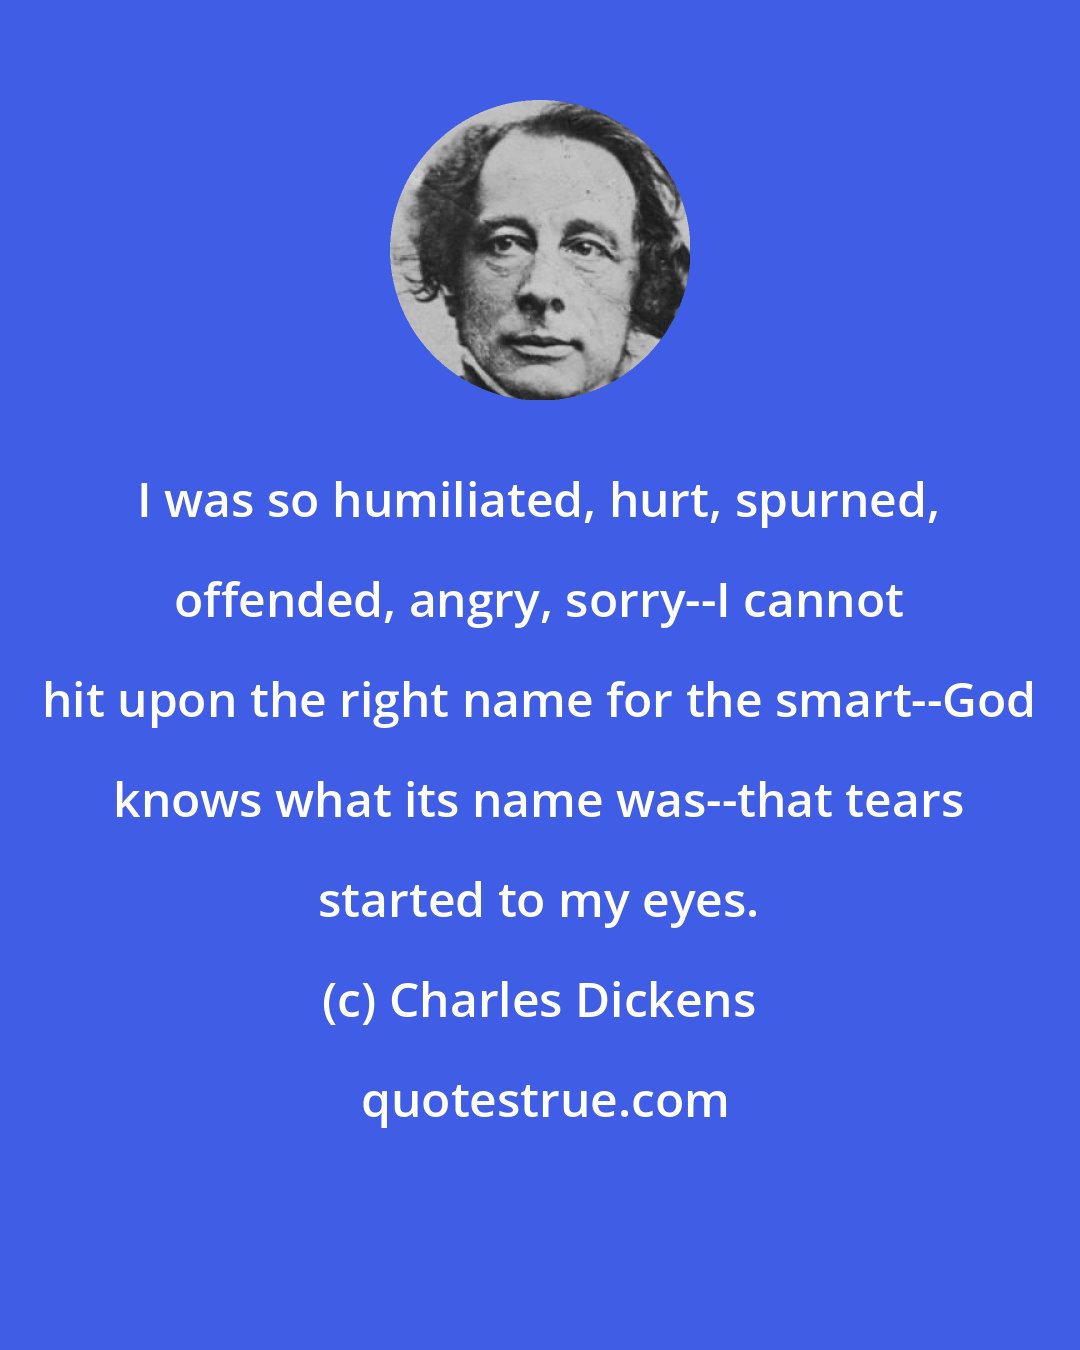 Charles Dickens: I was so humiliated, hurt, spurned, offended, angry, sorry--I cannot hit upon the right name for the smart--God knows what its name was--that tears started to my eyes.